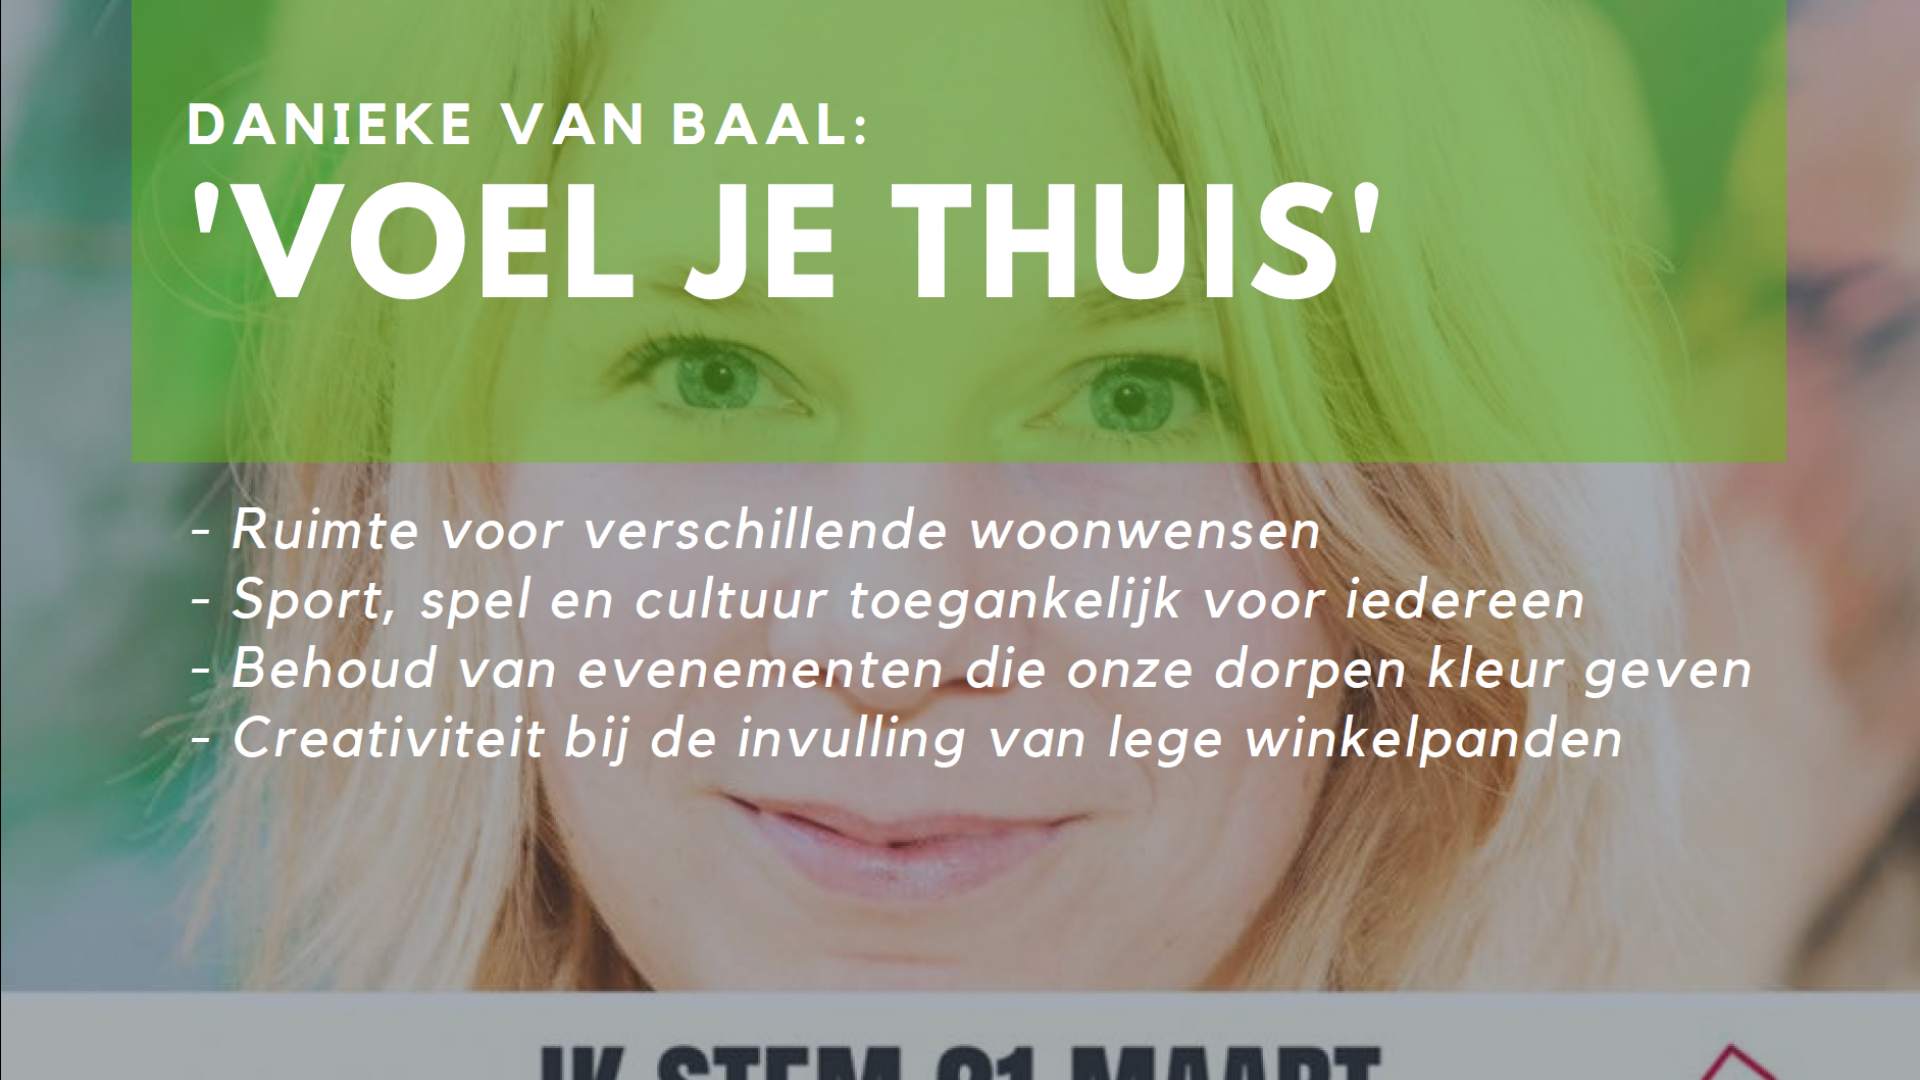 Voel je thuis